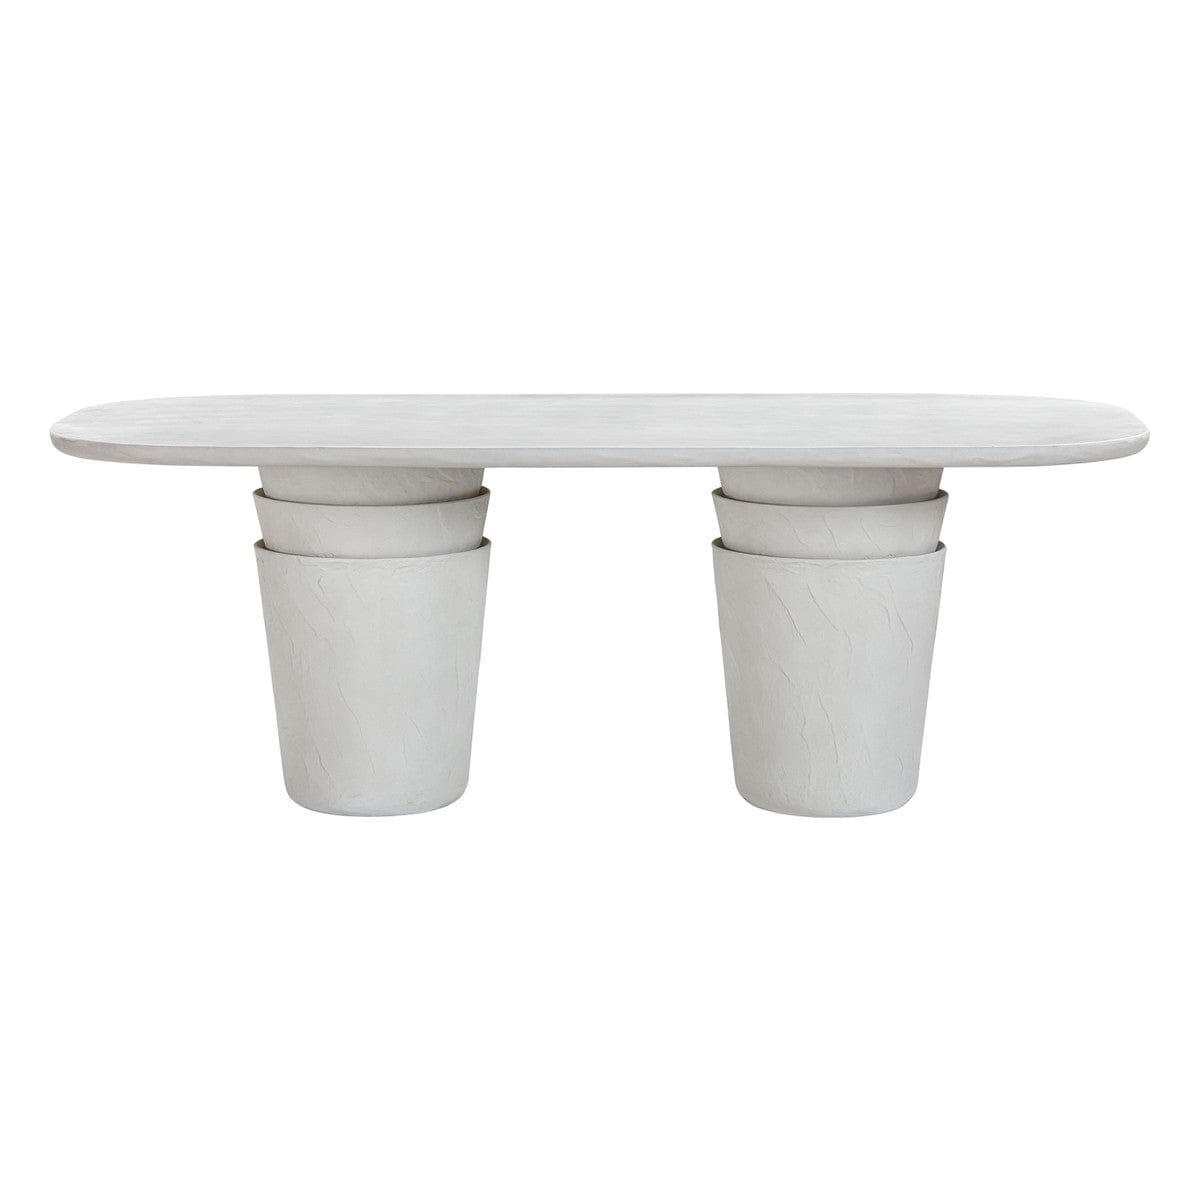 Candelabra Home Margot Light Grey Faux Plaster Indoor / Outdoor Concrete 83" Oval Dining Table Outdoor Dining Table TOV-O54297